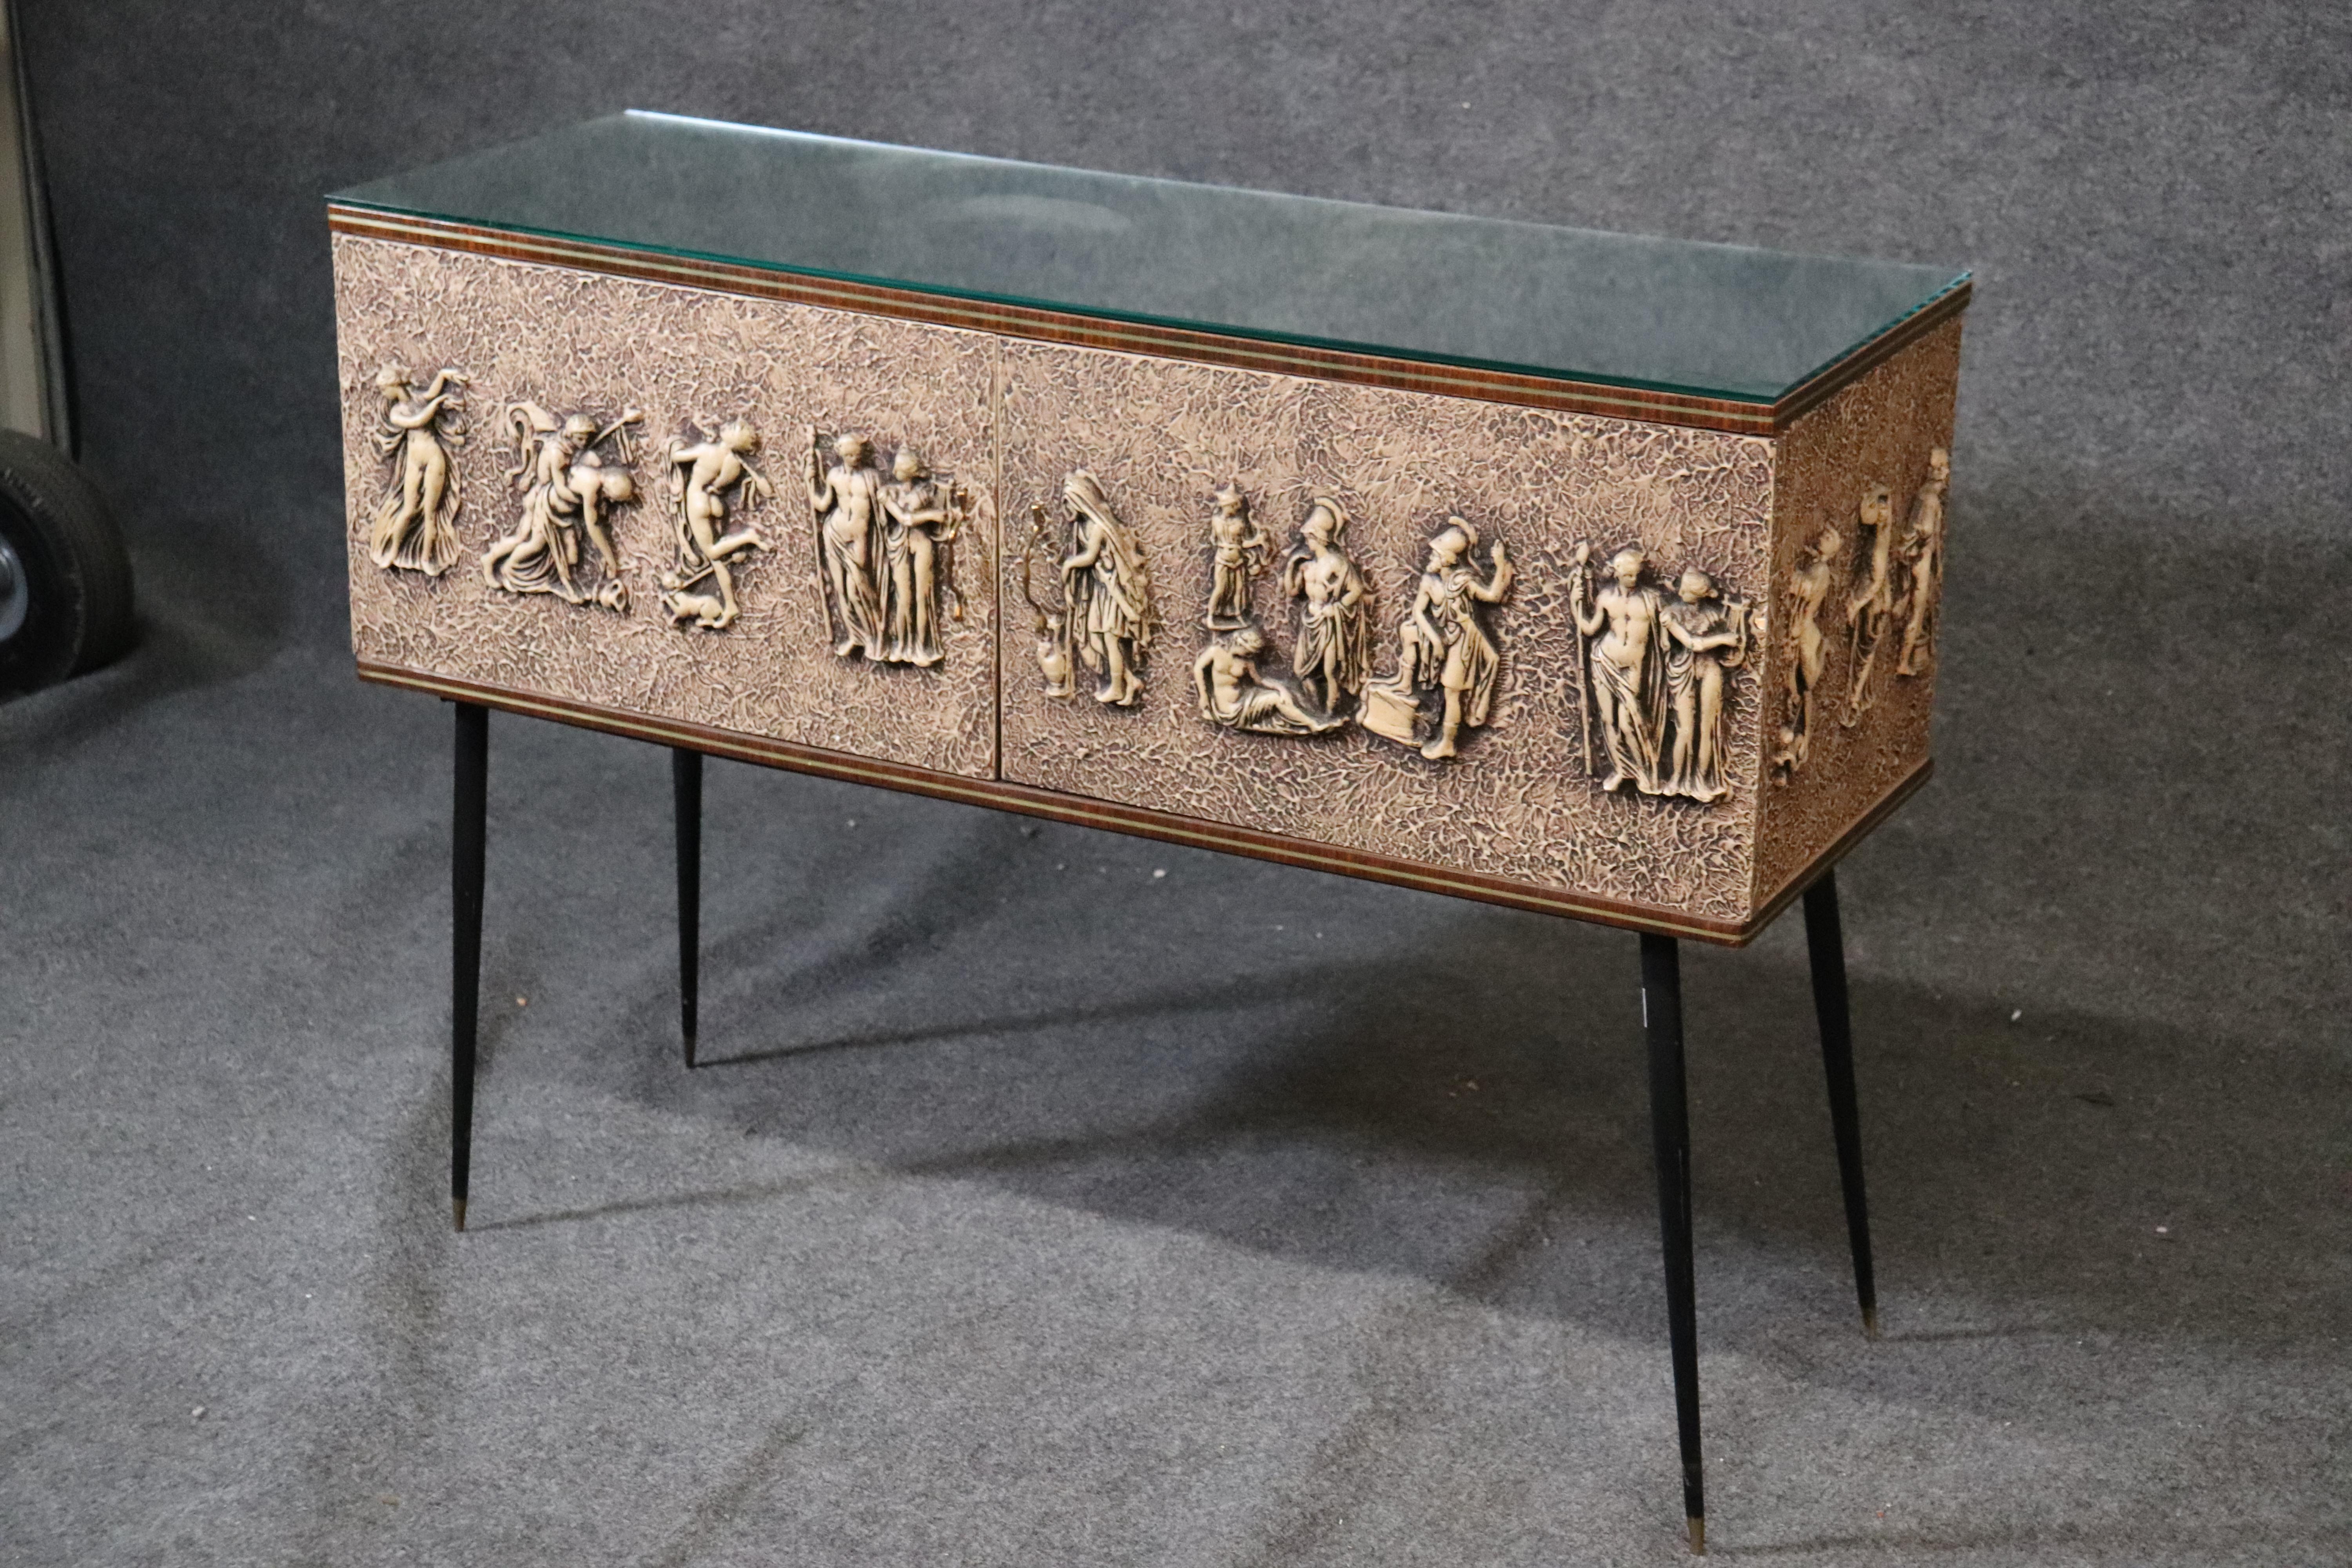 This is a beautiful Italian made figural cabinet that has storage and can function as a low console table. The table measures: 30 tall x 40 wide x 13 deep.